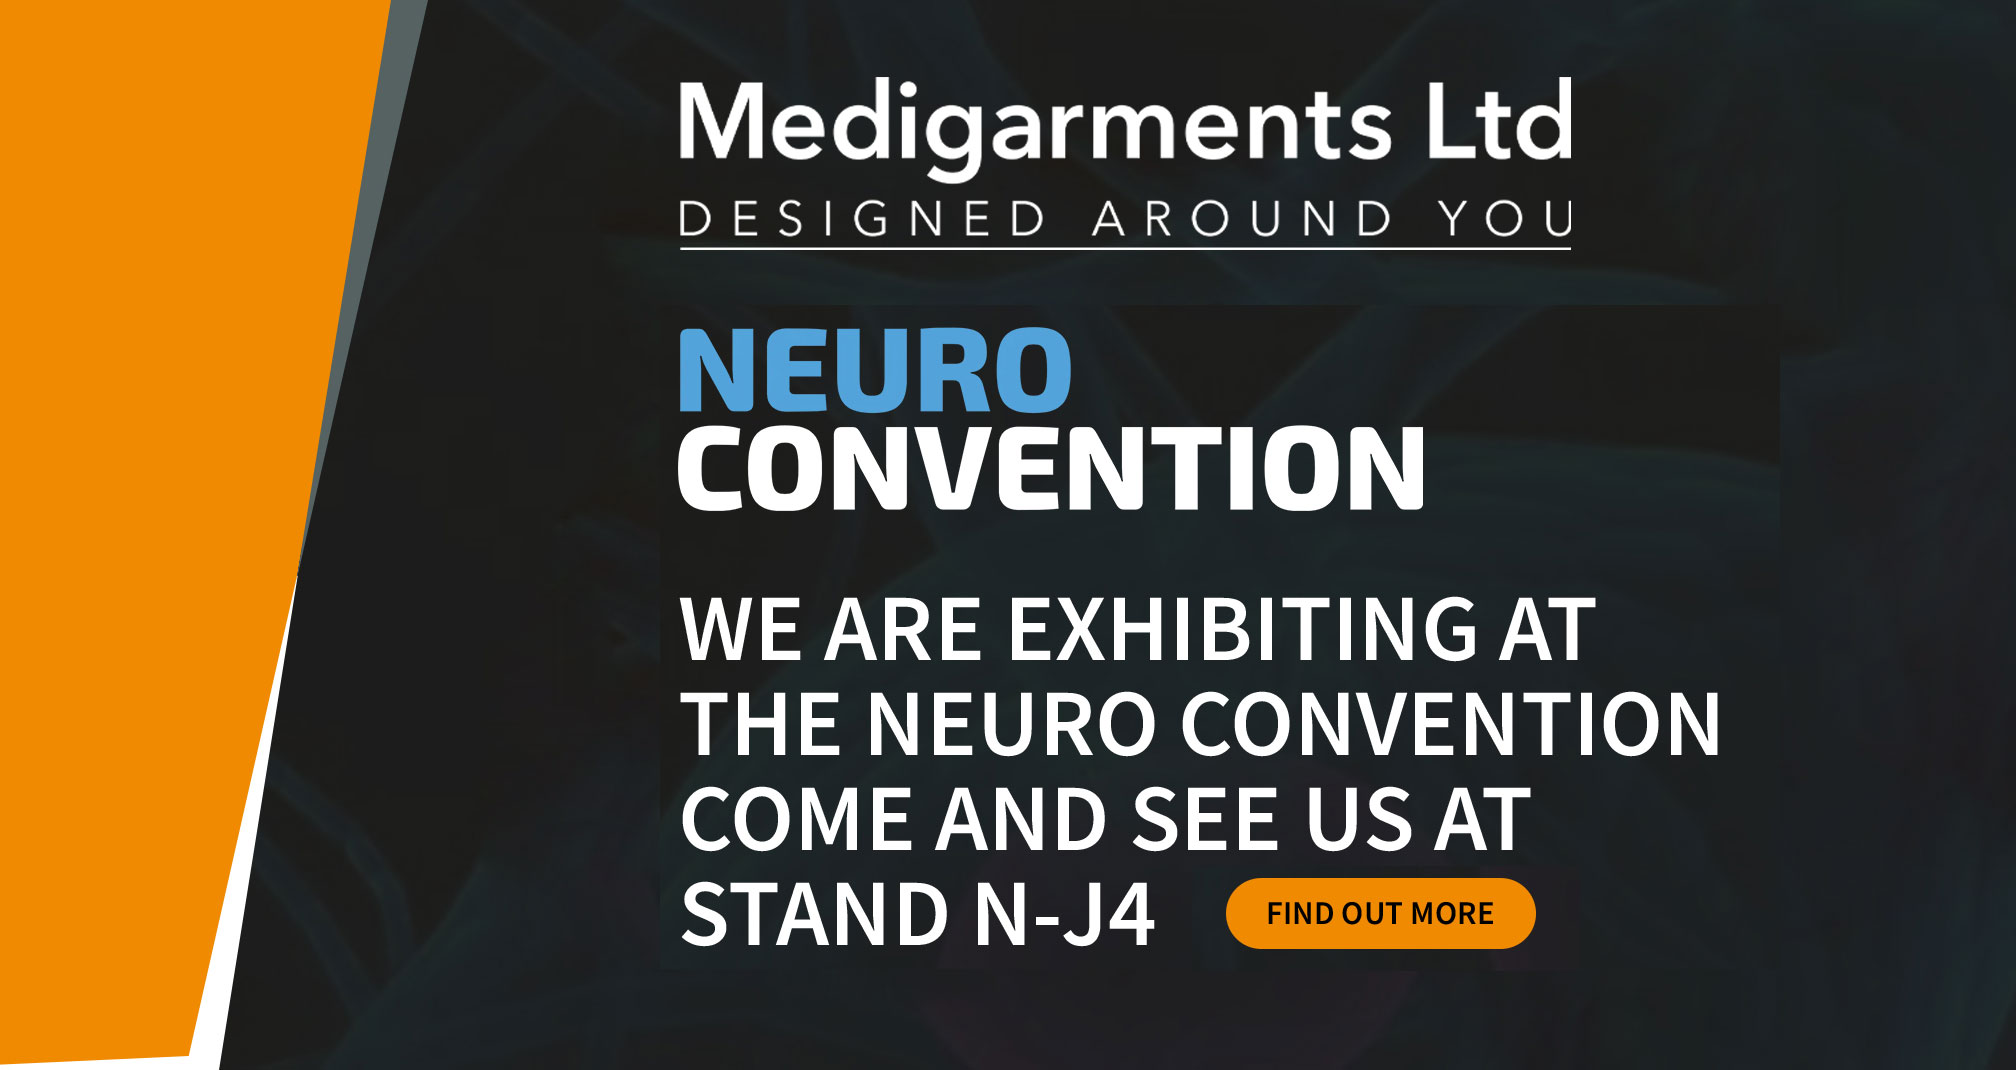 Medigarments Ltd to Exhibit at Neuro Convention 2023